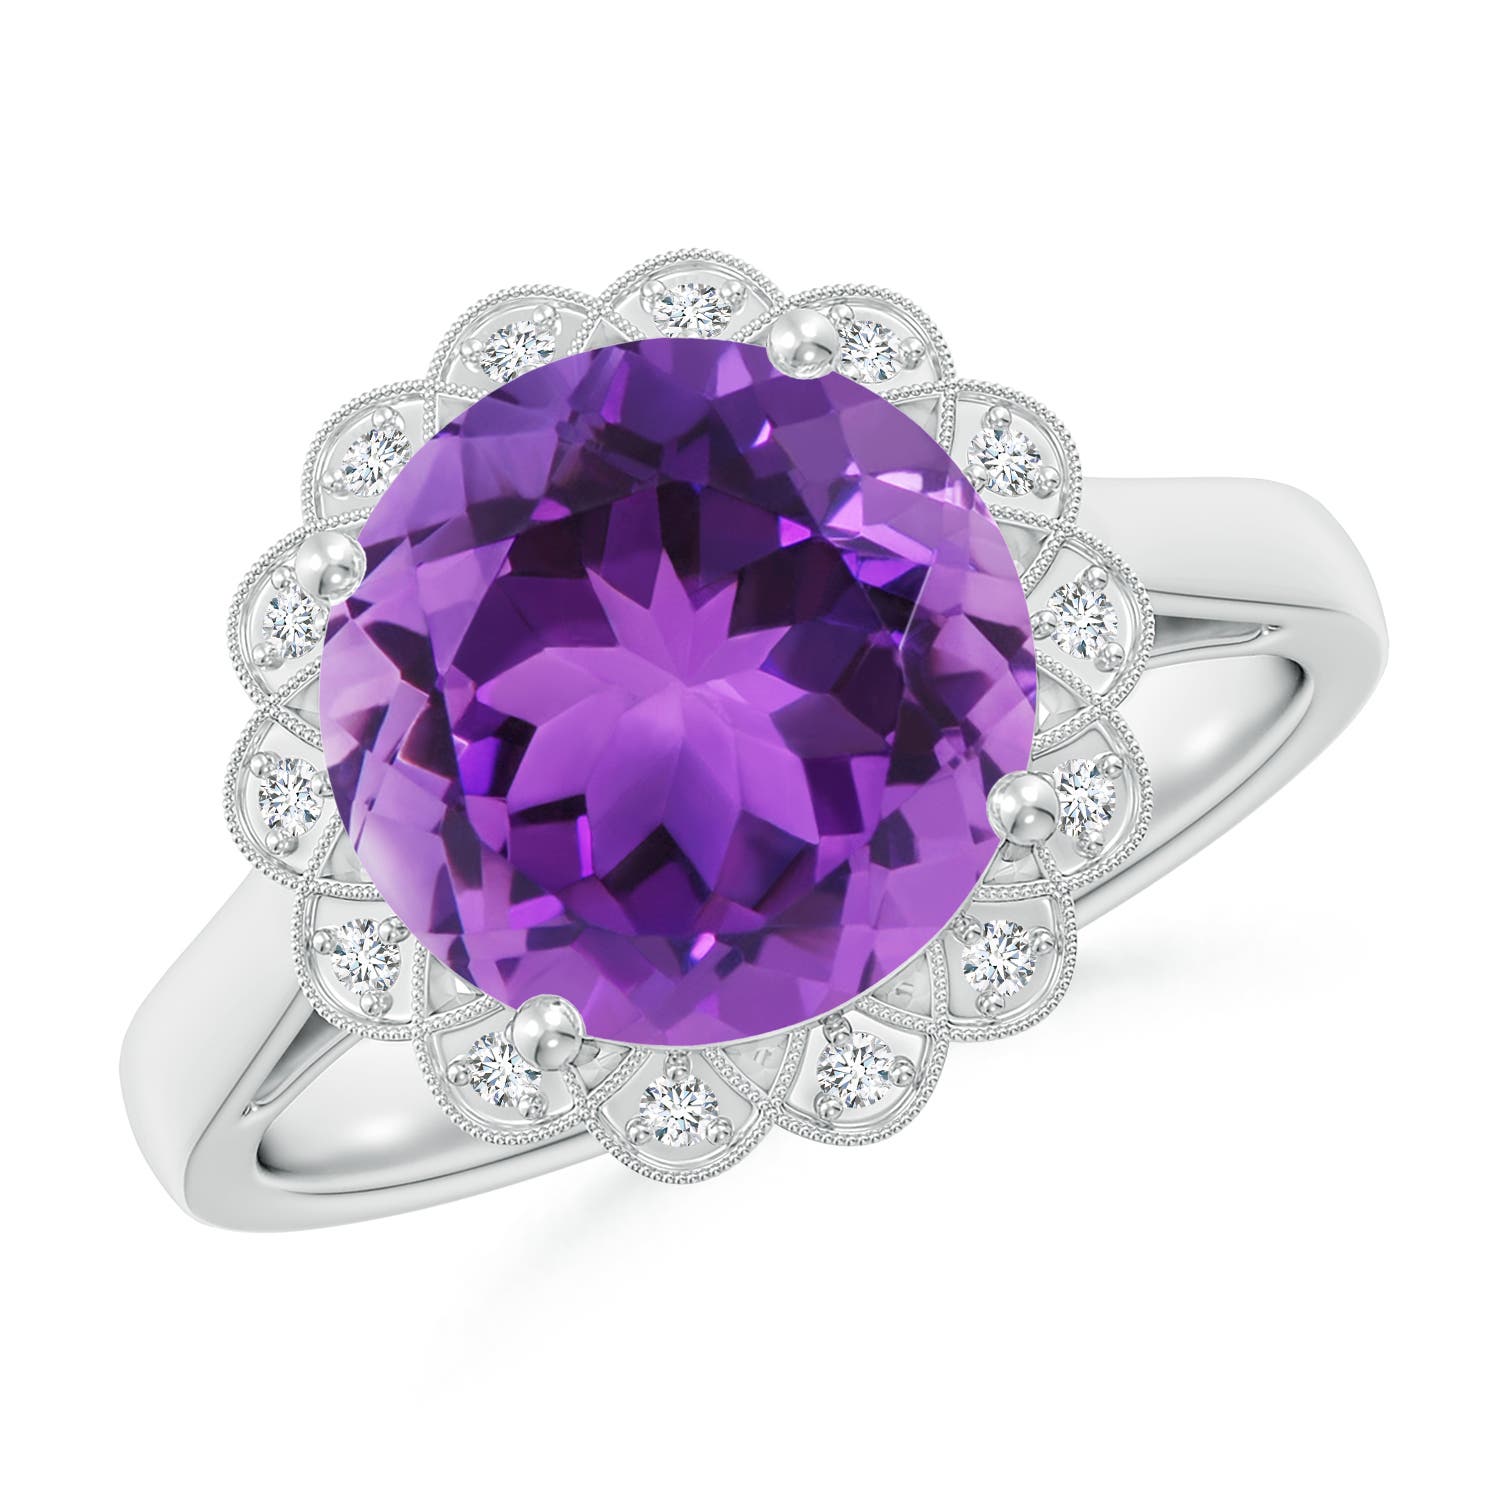 AAA - Amethyst / 3.28 CT / 14 KT White Gold